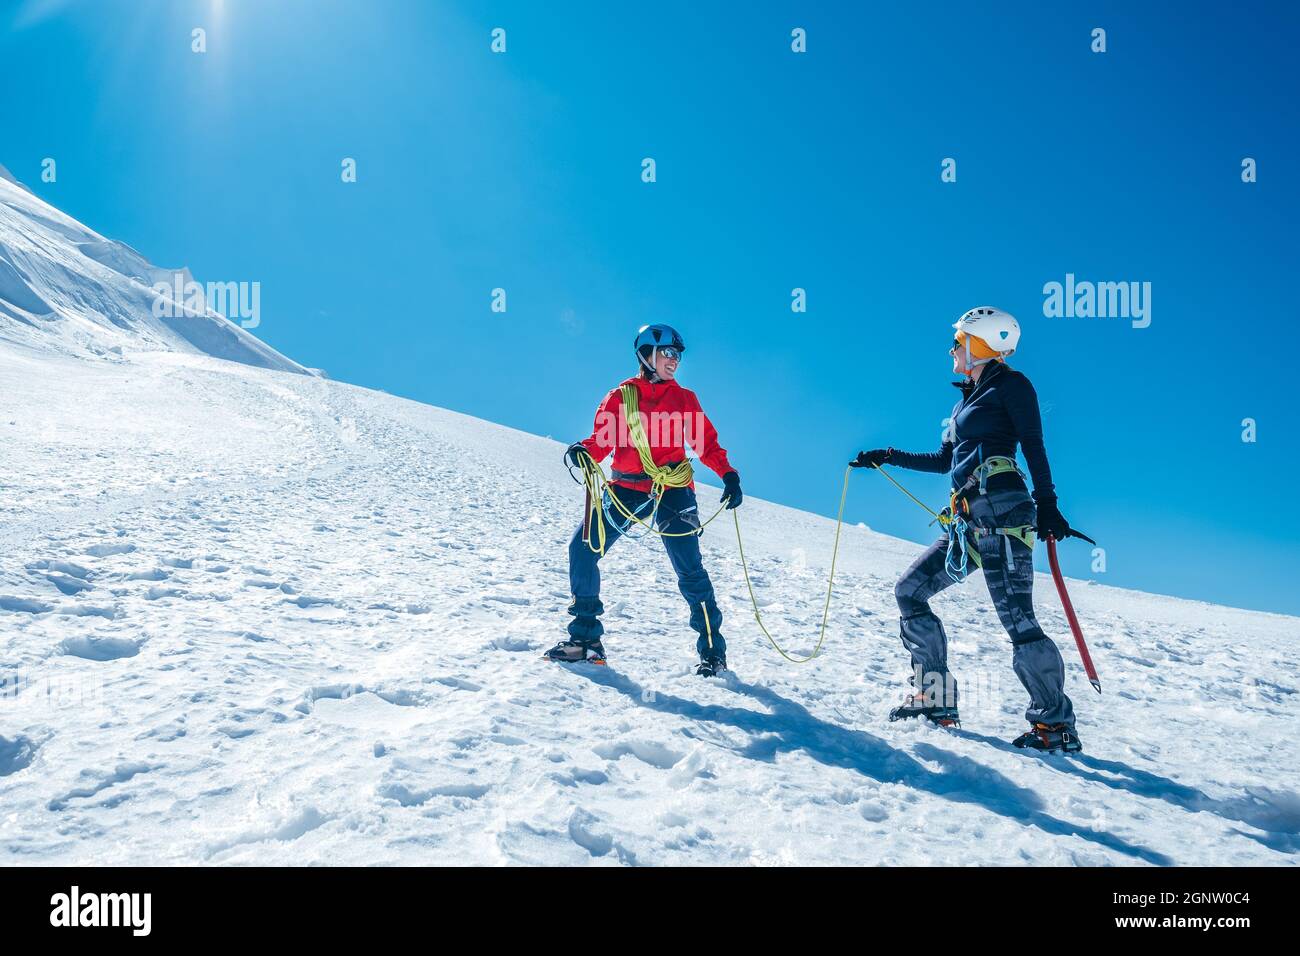 Two laughing to each other young women Rope team ascending Mont blanc du Tacul summit 4248m dressed mountaineering clothes with ice axes on snowy slop Stock Photo